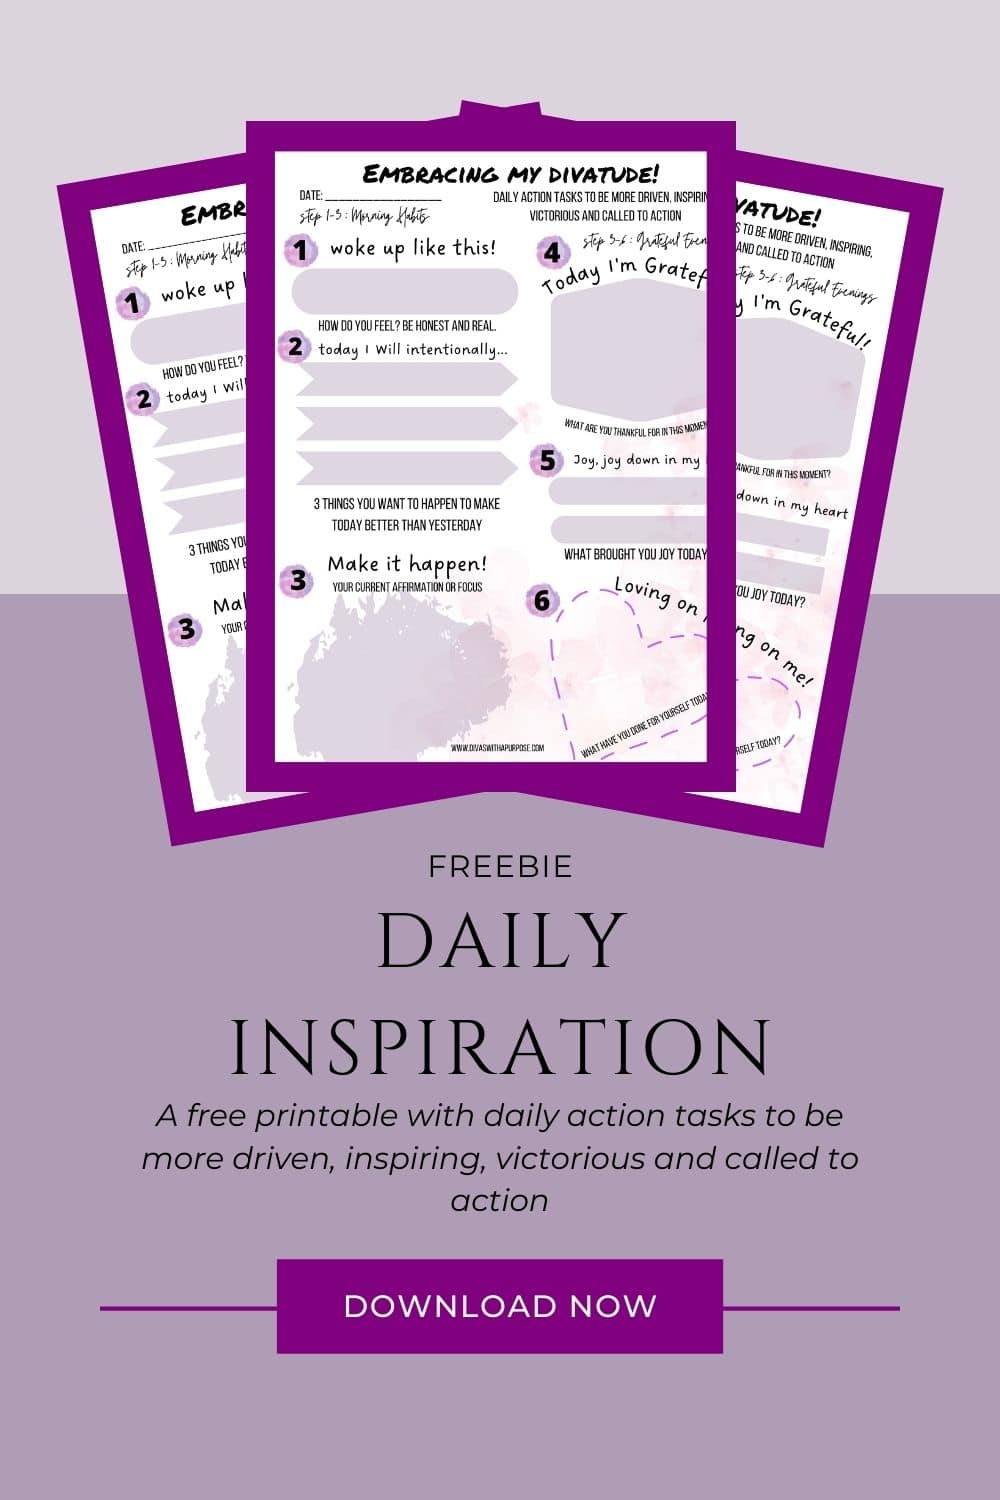 Free daily inspiration printable to help you embrace your DIVATUDE - being driven, inspiring, victorious and called to action in your daily life